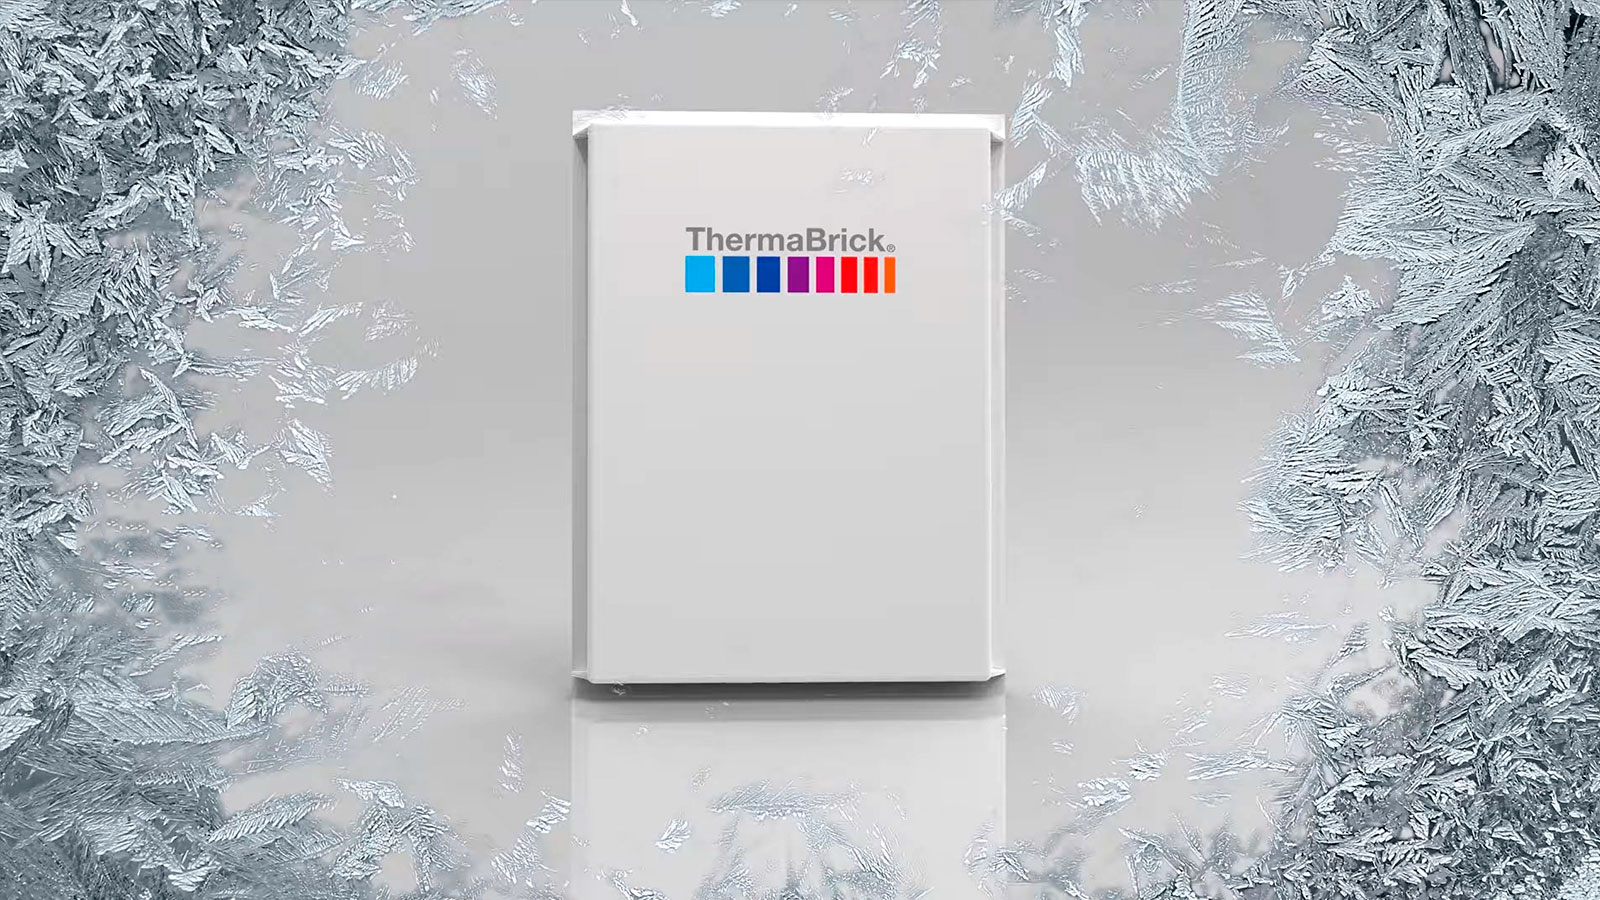 ThermaBrick package standing within a frosted frame.